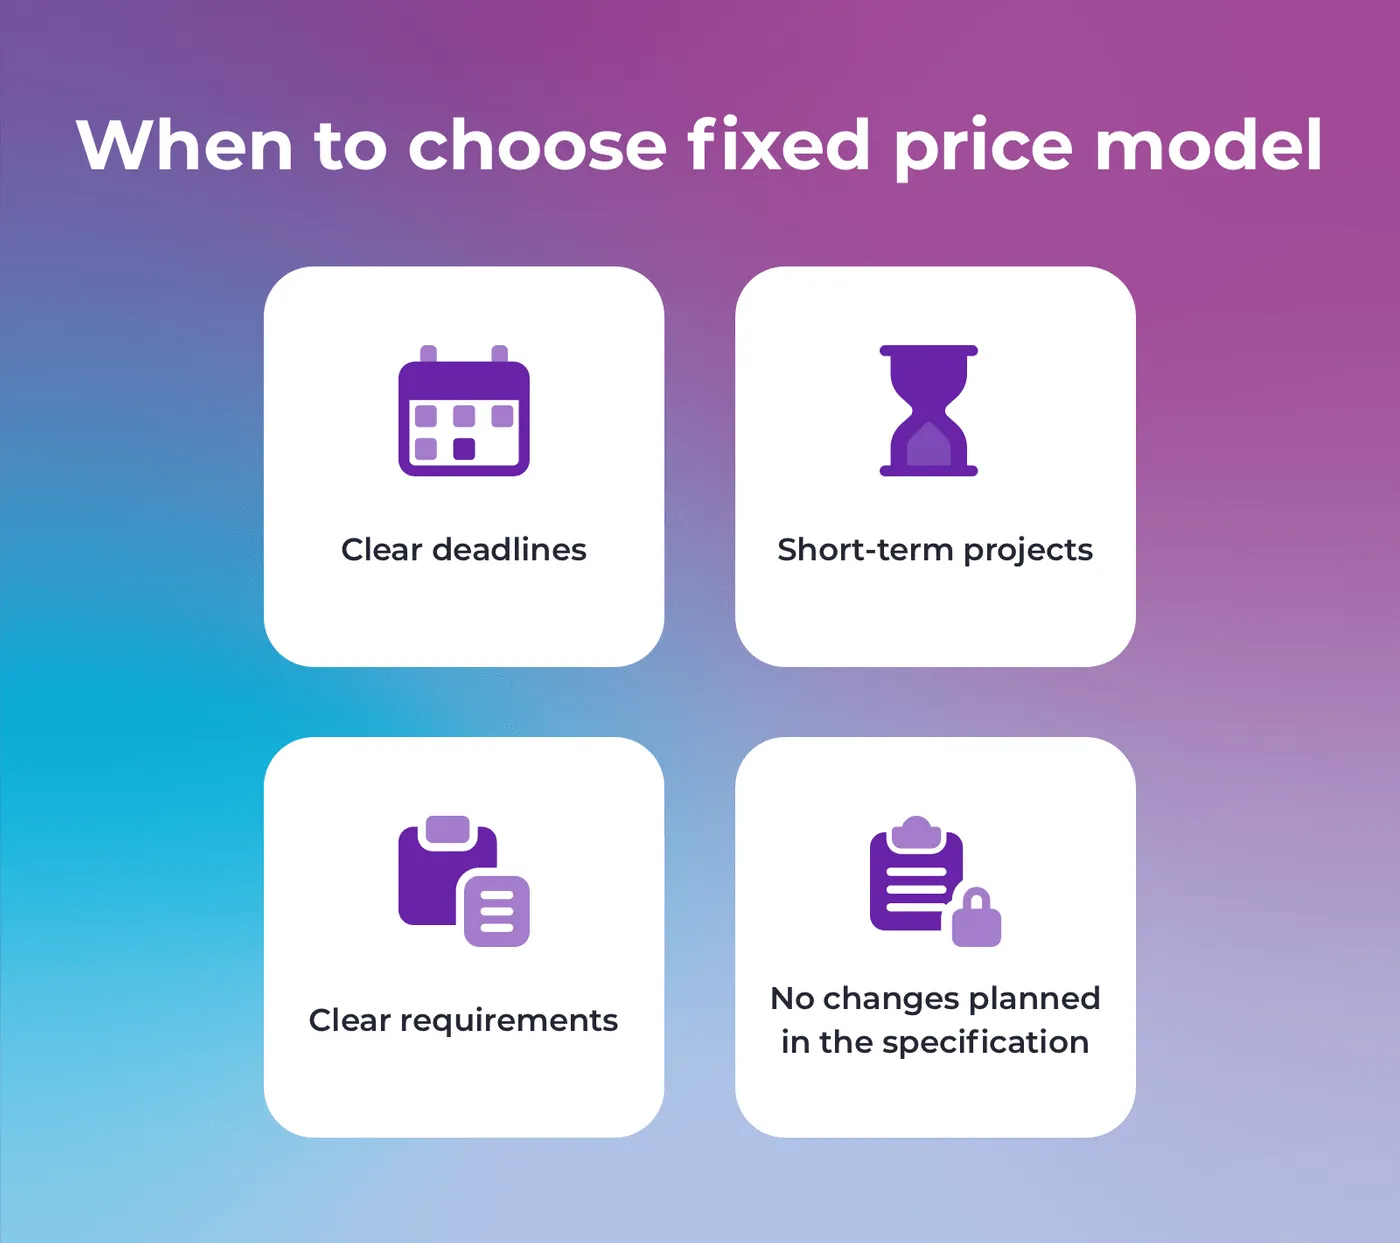 Four reasons to choose a fixed price model